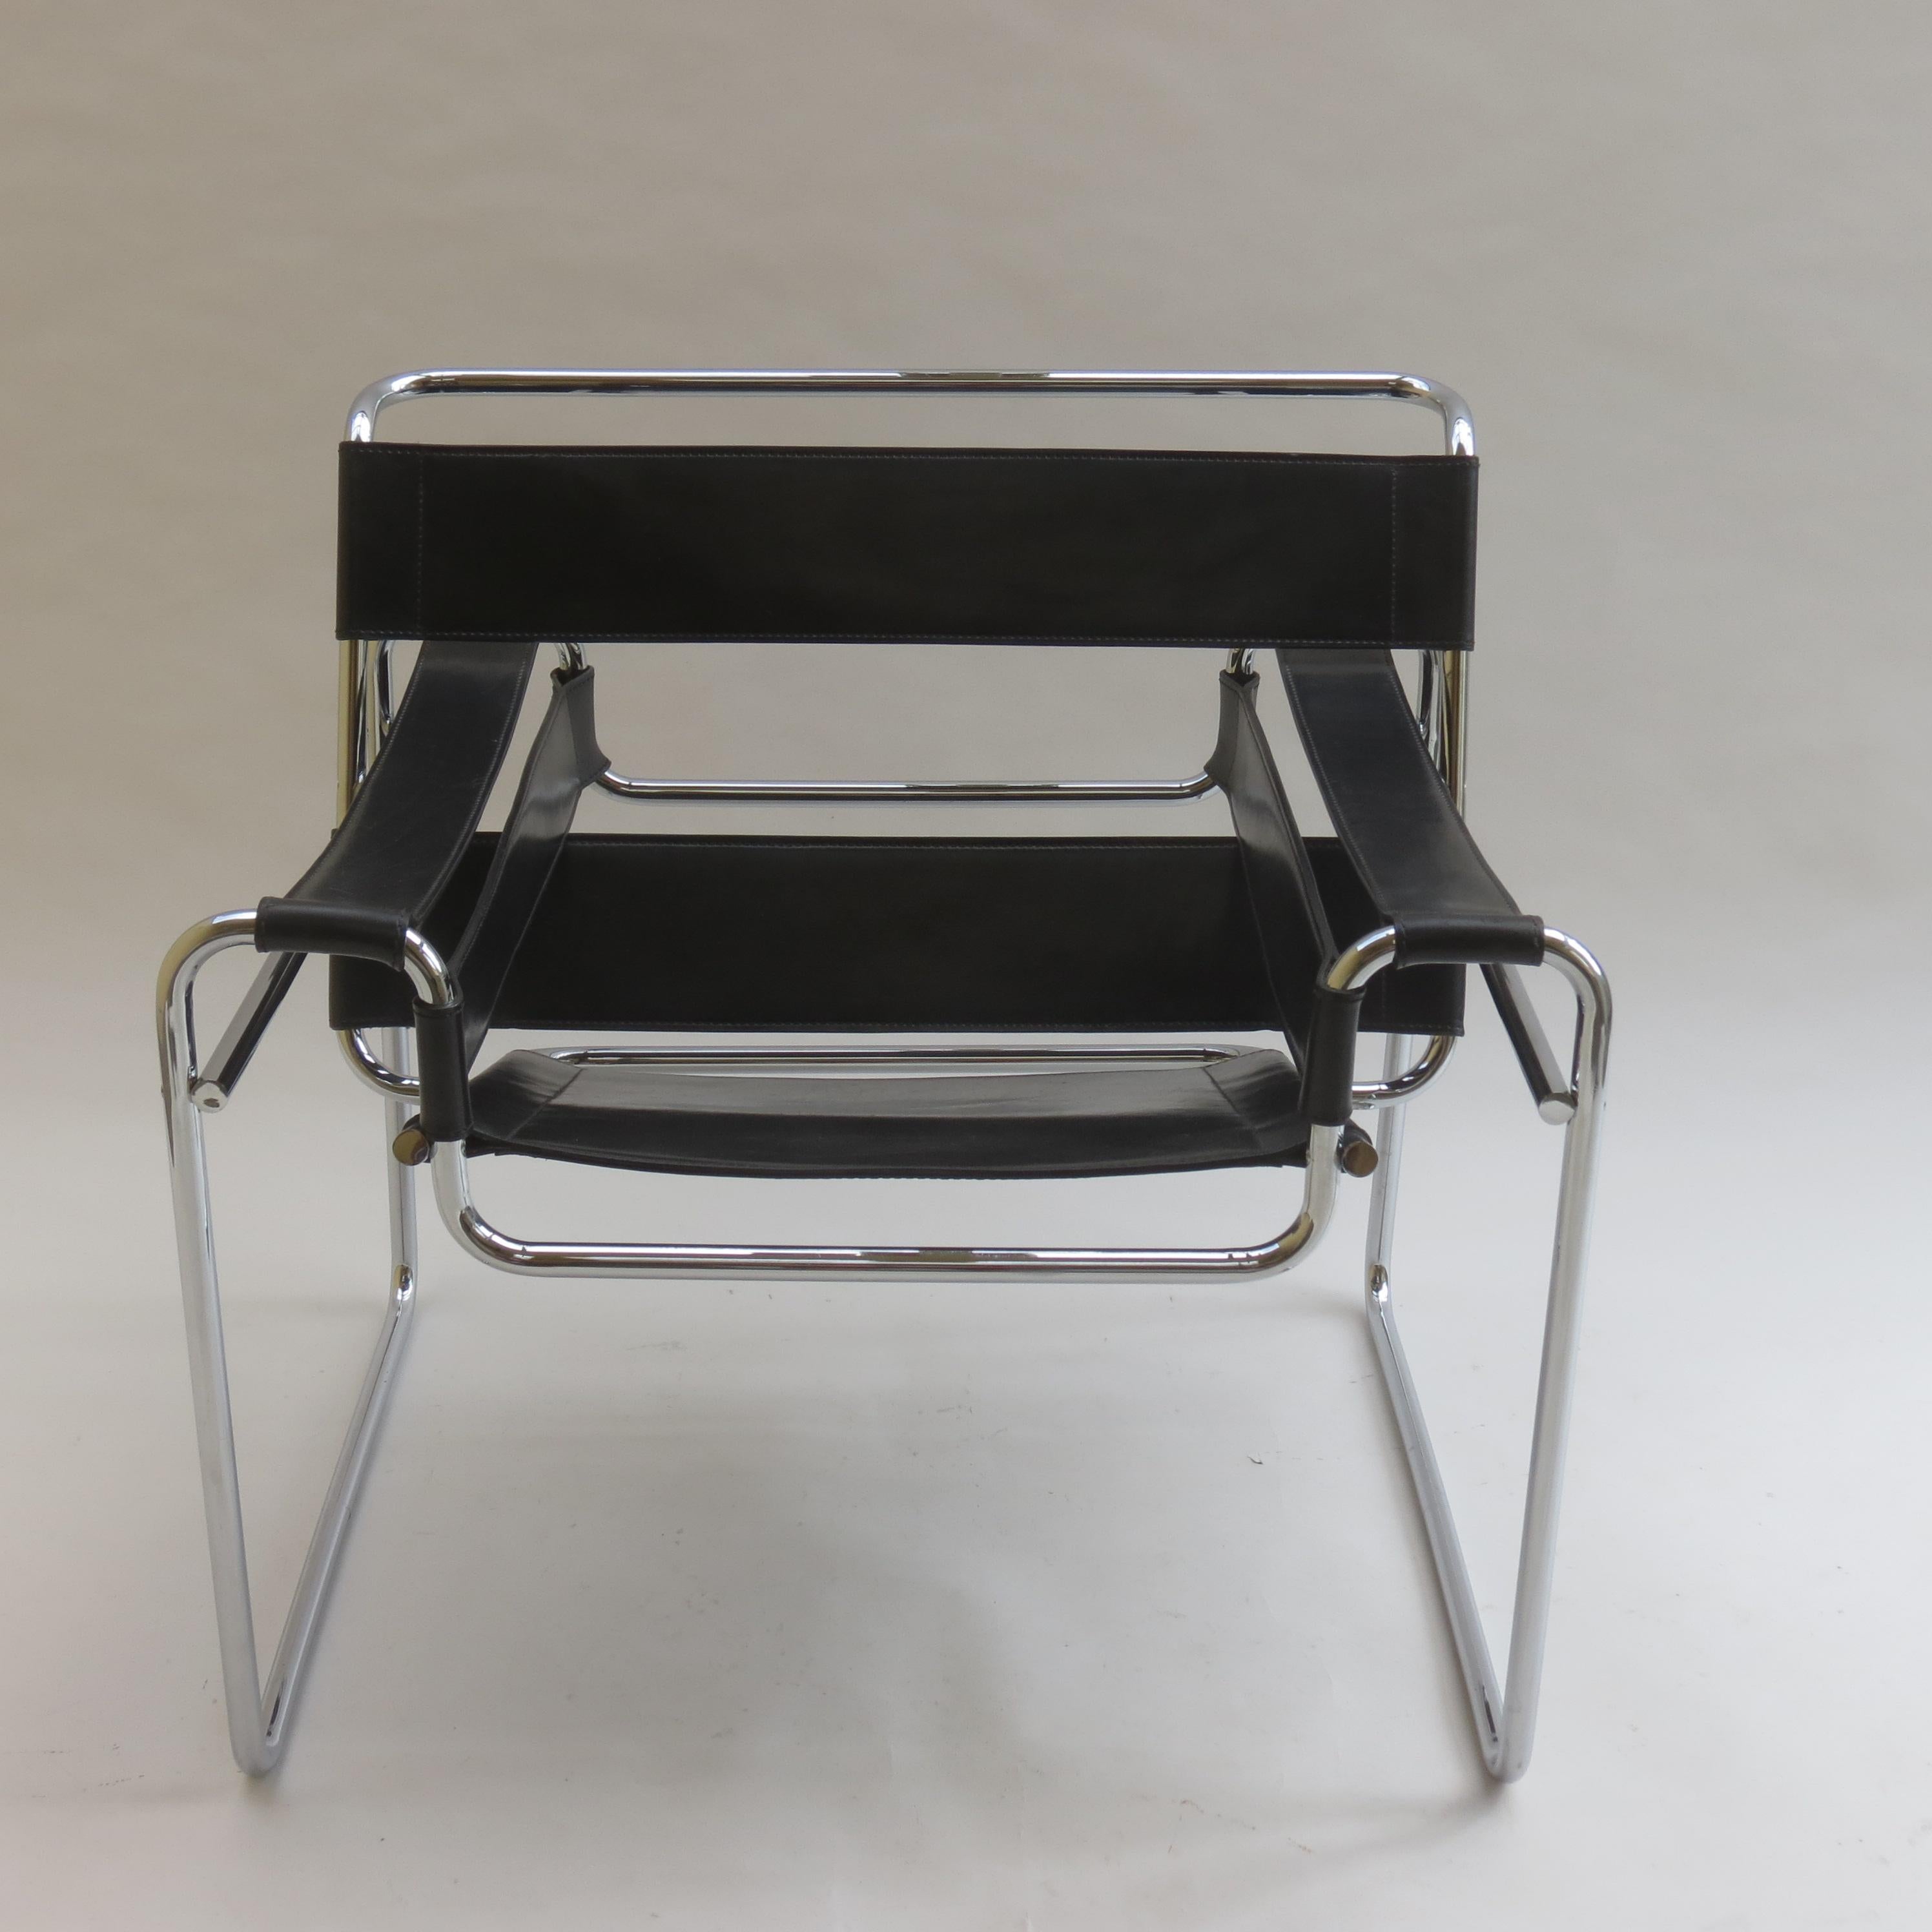 Wassily chair designed by Marcel Breuer and manufactured by Knoll. The original year of design of this chair was 1925, this particular chair was manufactured in the early 1980s.

Made from polished chrome tube with leather seat and arms. The chair